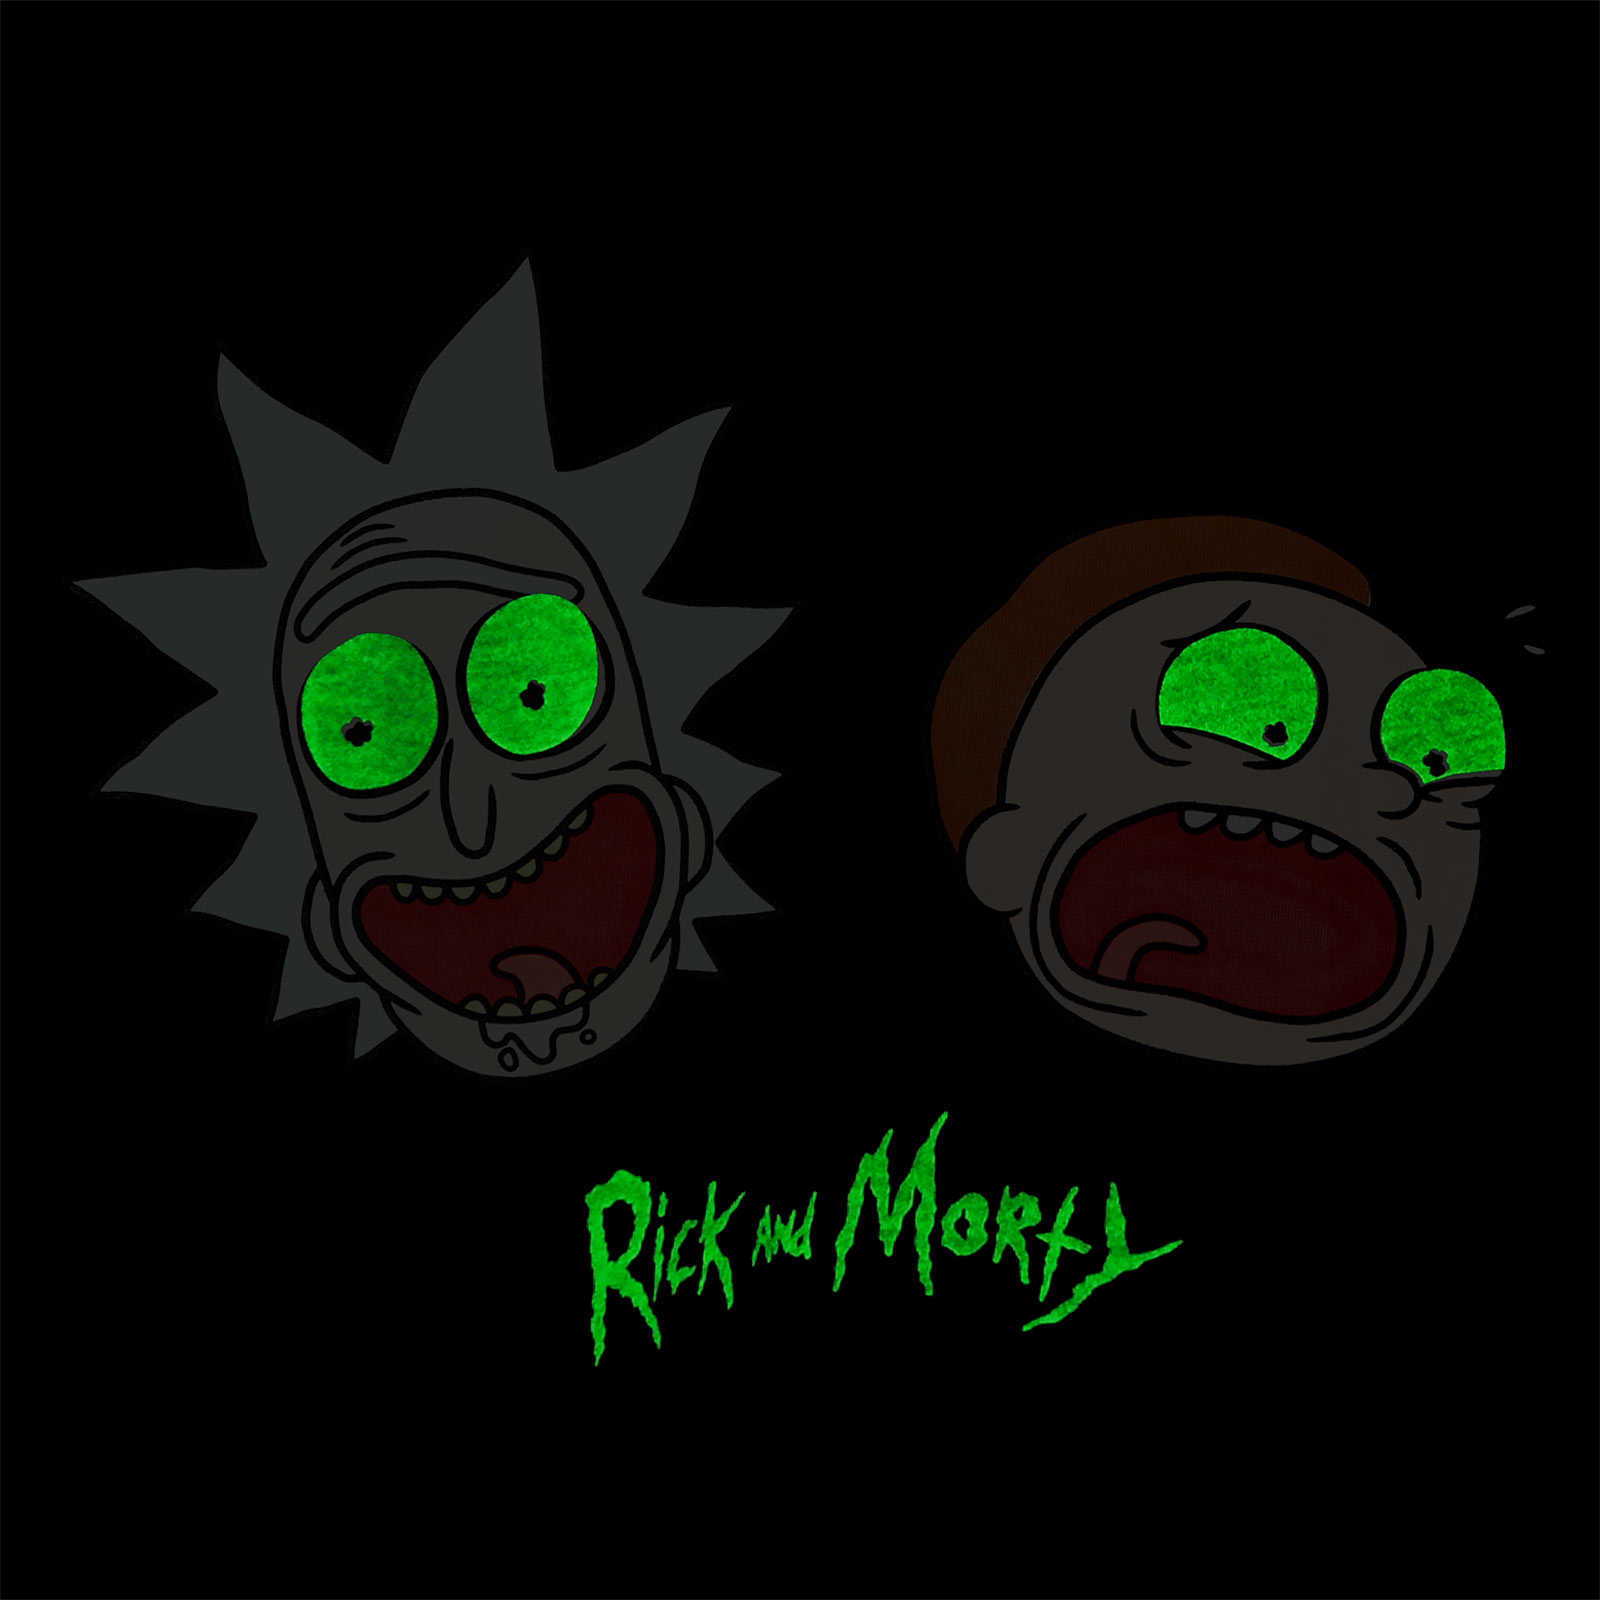 Rick and Morty - Crazy Faces Glow in the Dark T-Shirt